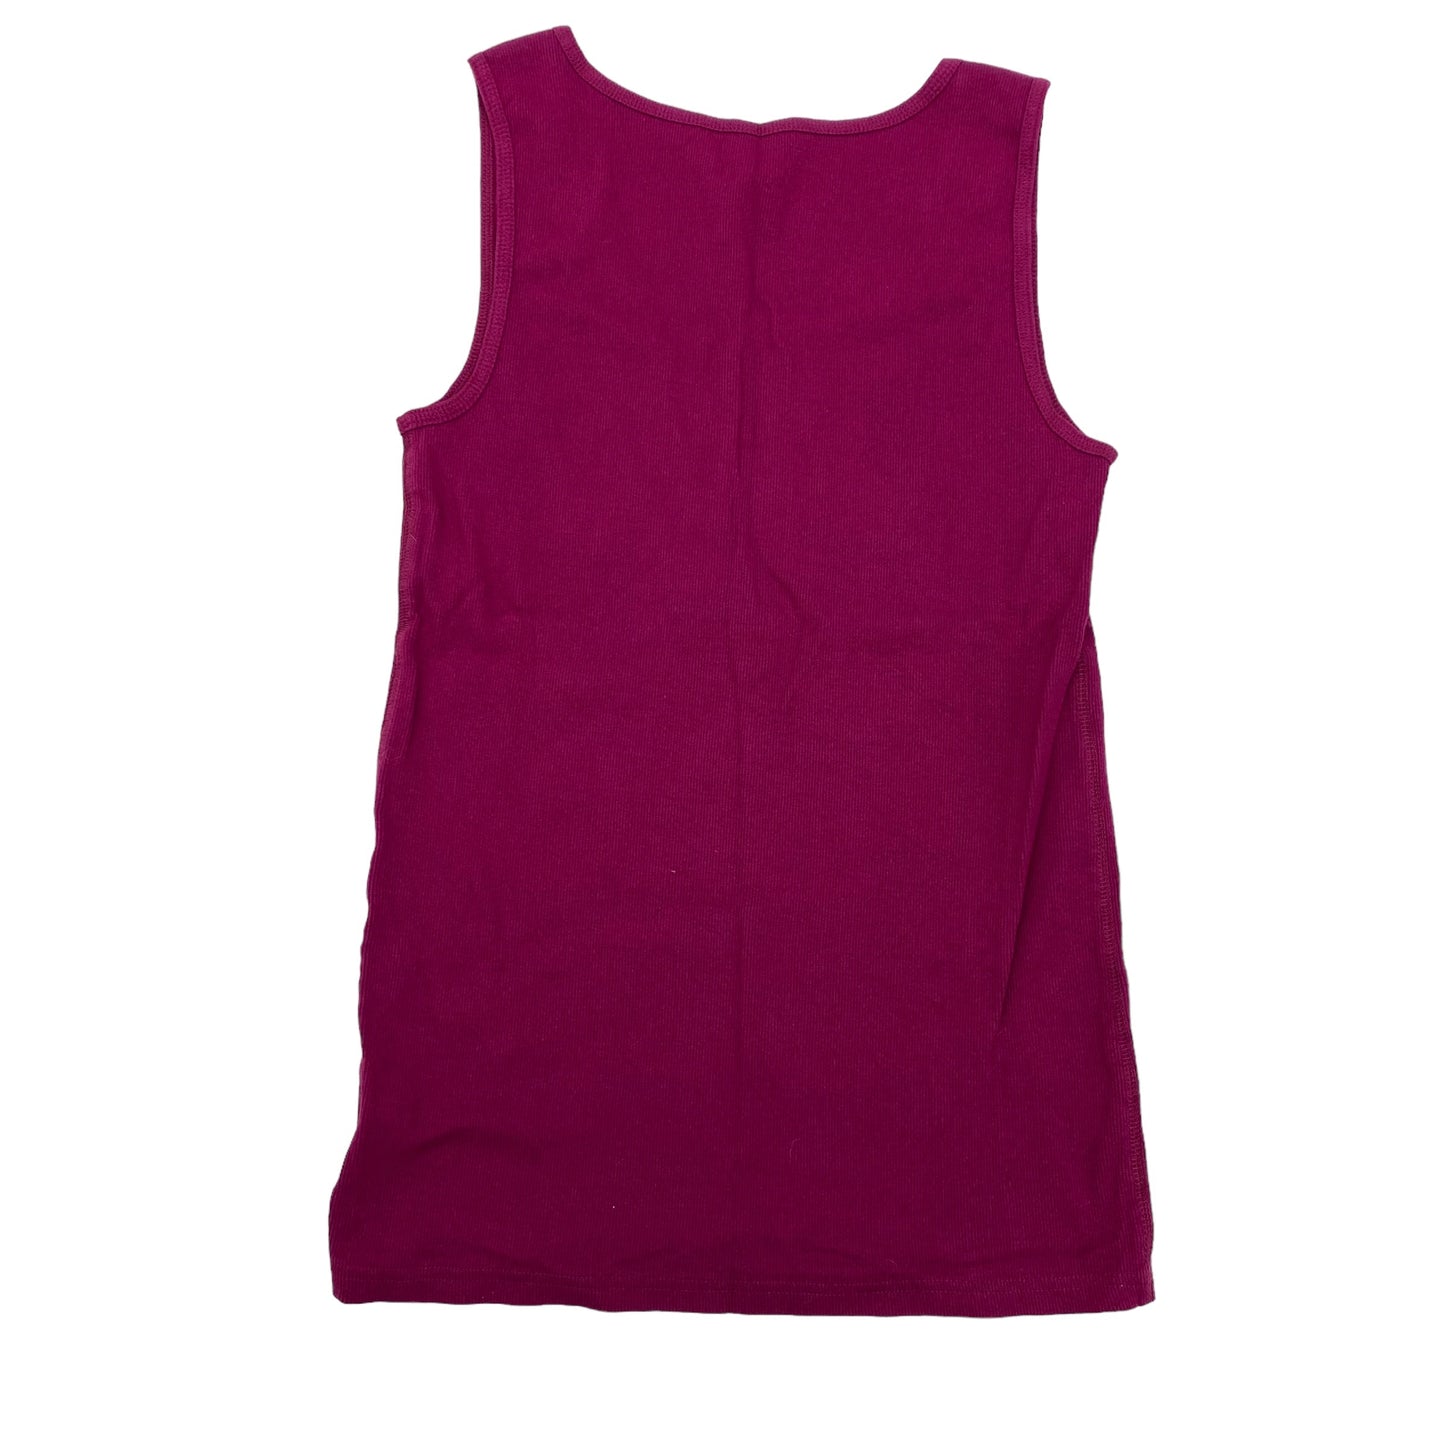 PINK TOP SLEEVELESS by FADED GLORY Size:2X